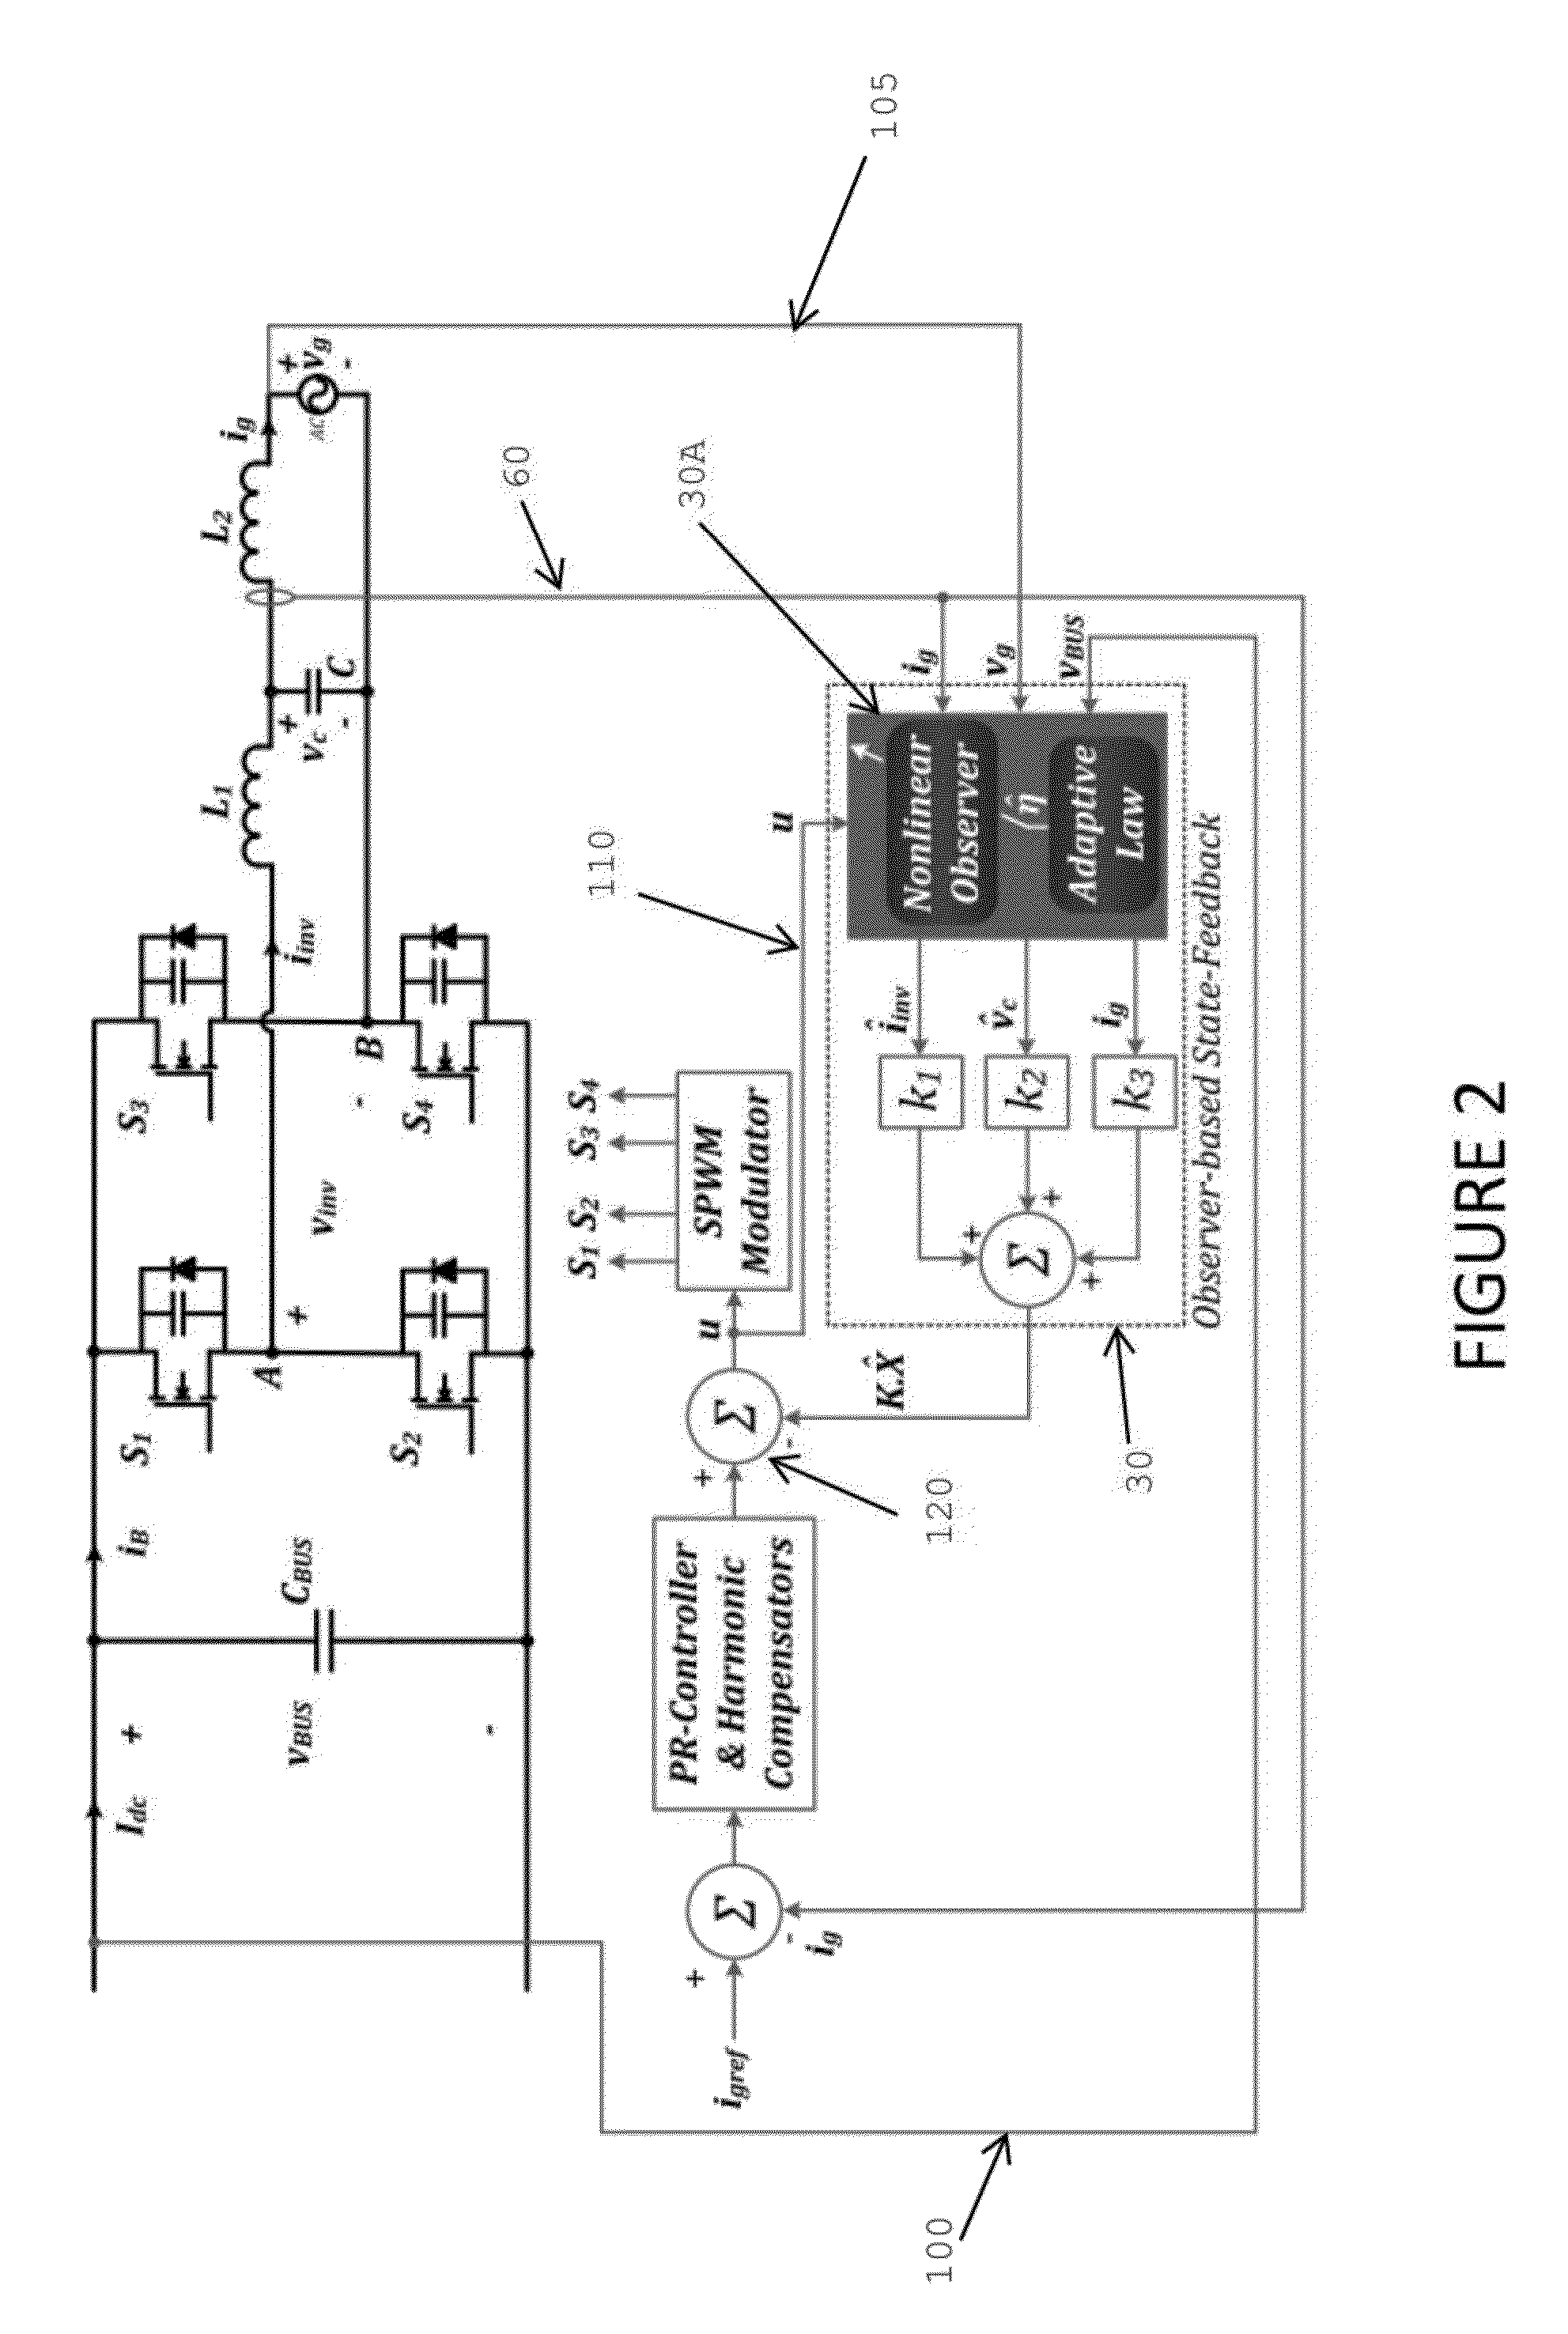 Observer-based control system for grid-connected dc/ac converters with lcl-filter